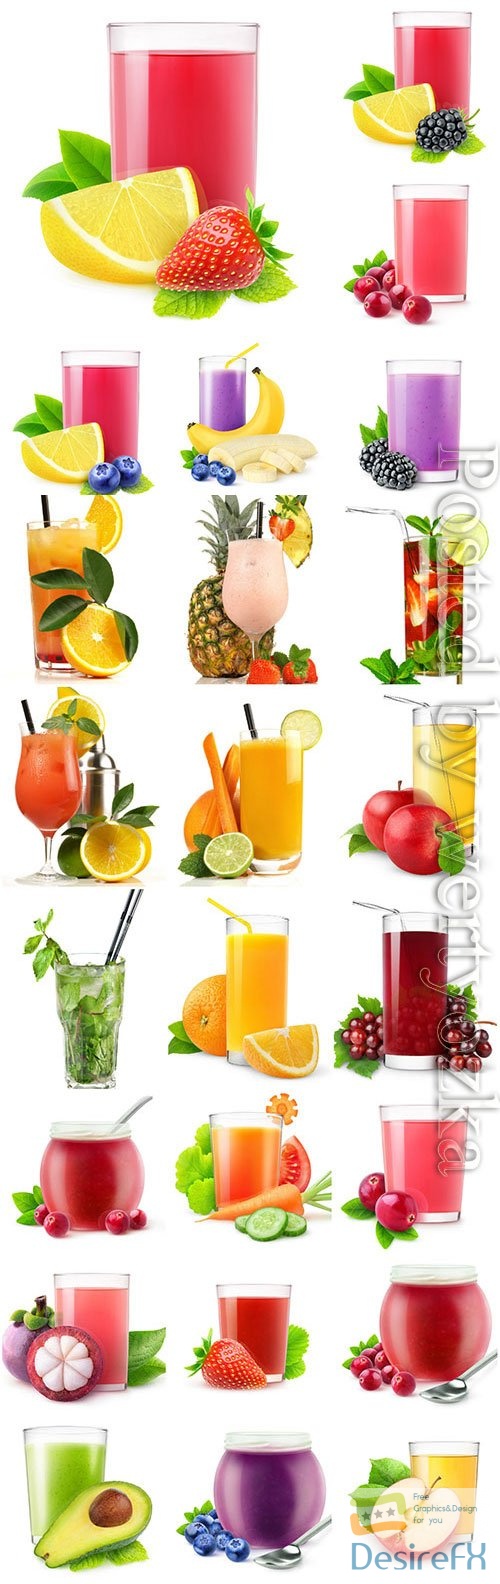 Fresh fruit and berry juices stock photo